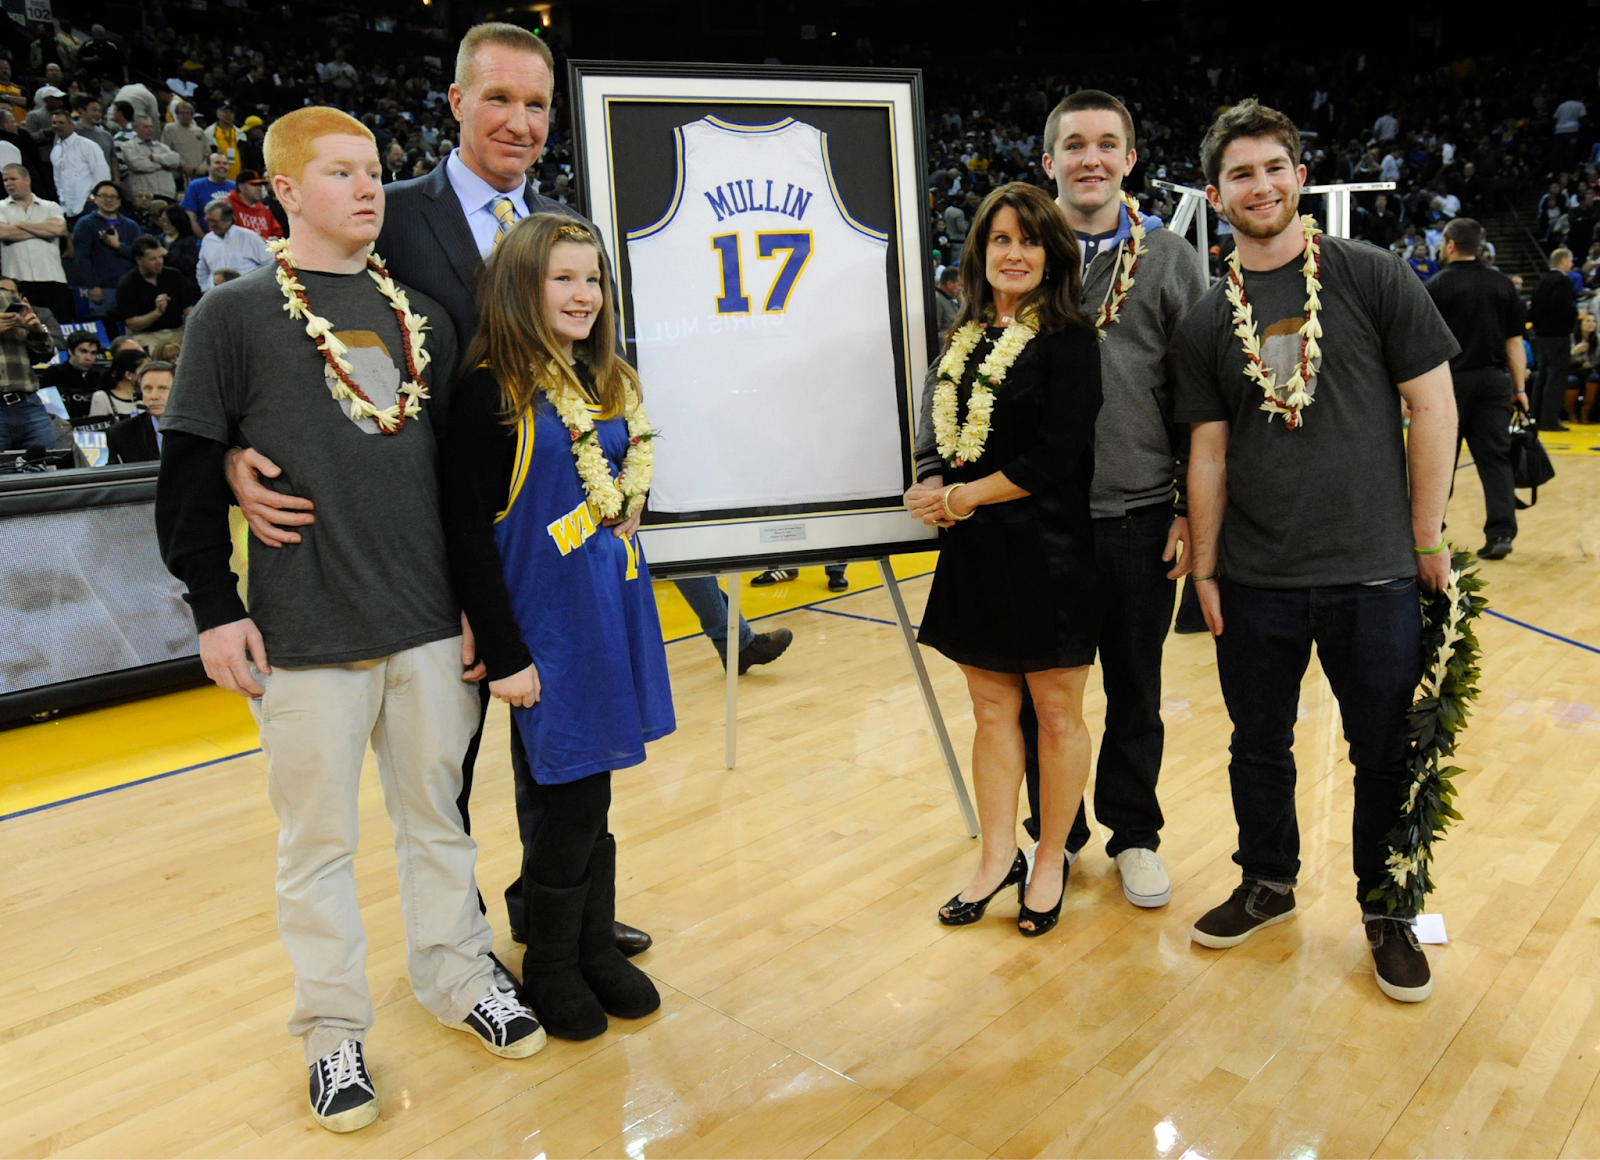 Chris Mullin Family and Relationships